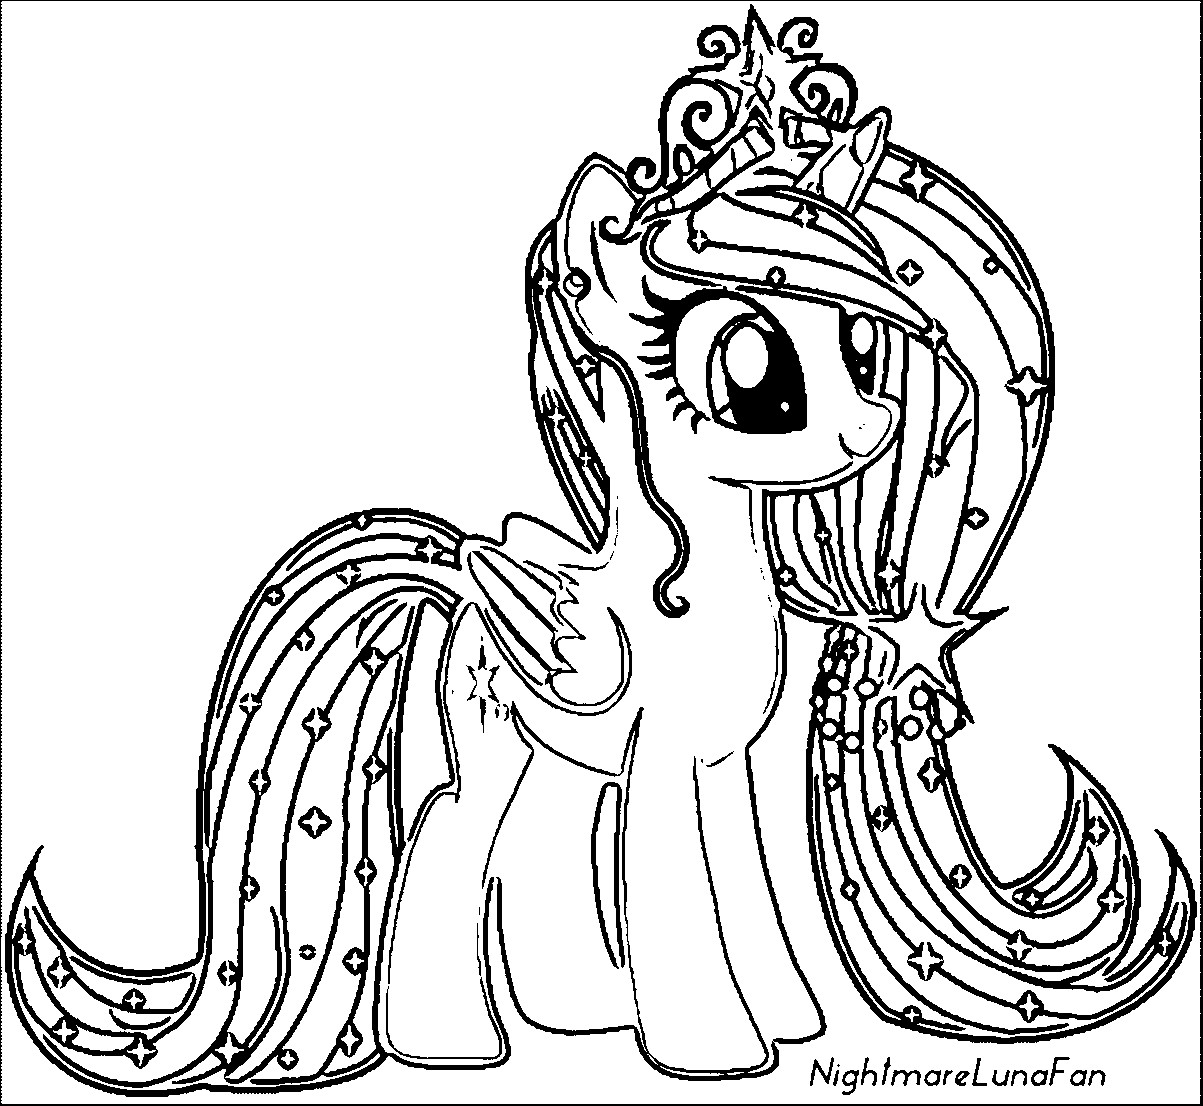 My Little Pony Free Coloring Pages For Girls
 My Little Pony Coloring Pages Rainbow Dash Equestria Girls